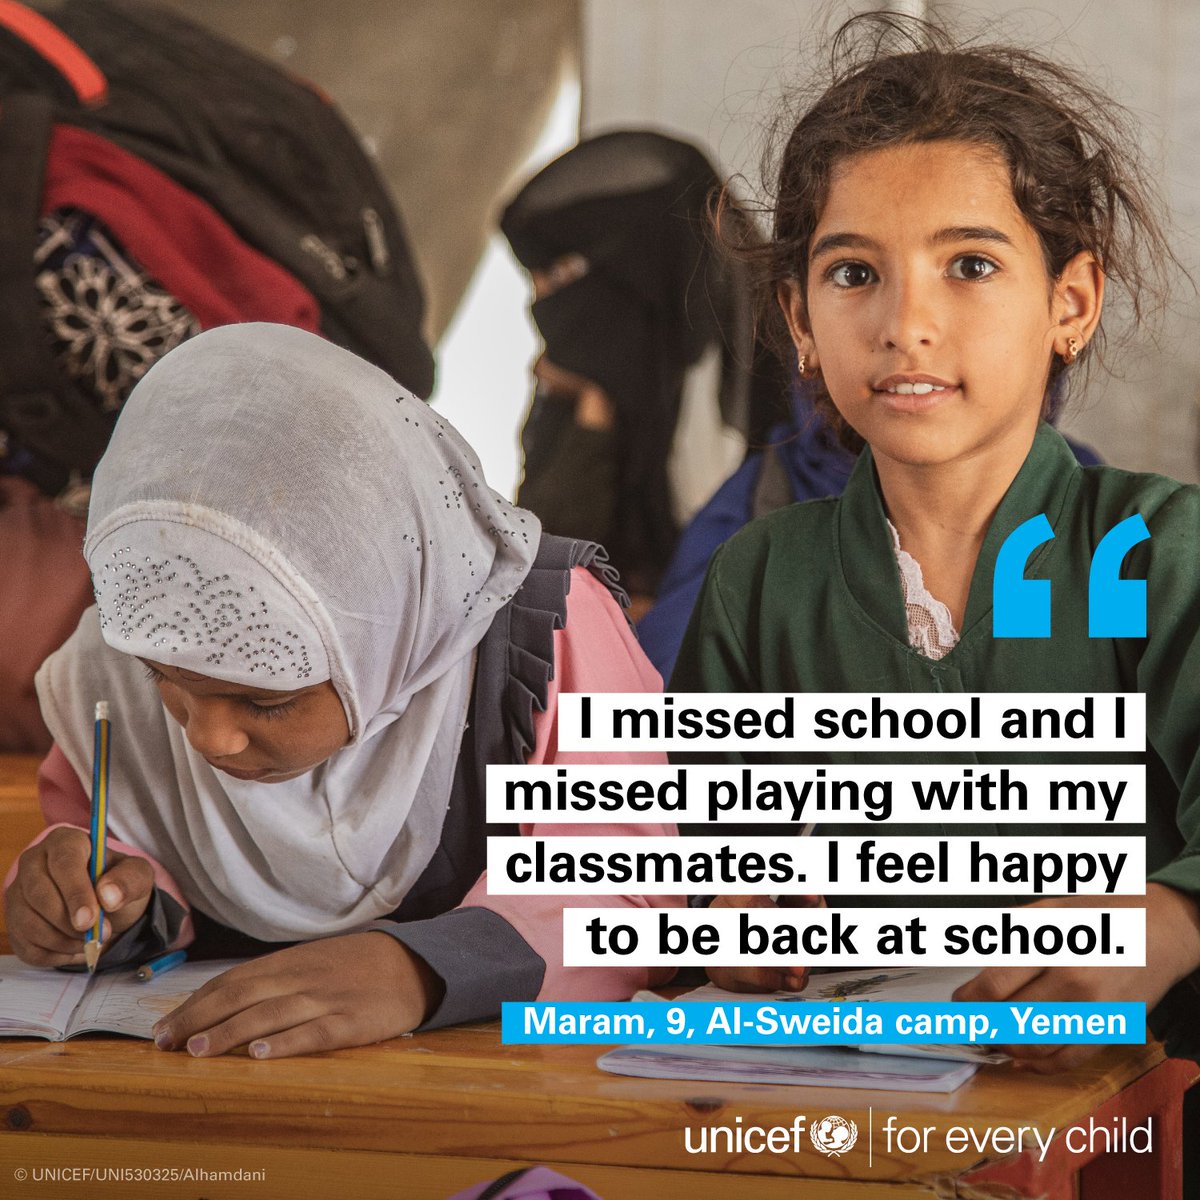 Nine years of conflict in Yemen have massively disrupted education for millions of children - with schools damaged, overcrowded classrooms and unpaid teachers. UNICEF and partners are helping provide basic education support so children like Maram get opportunities to learn.